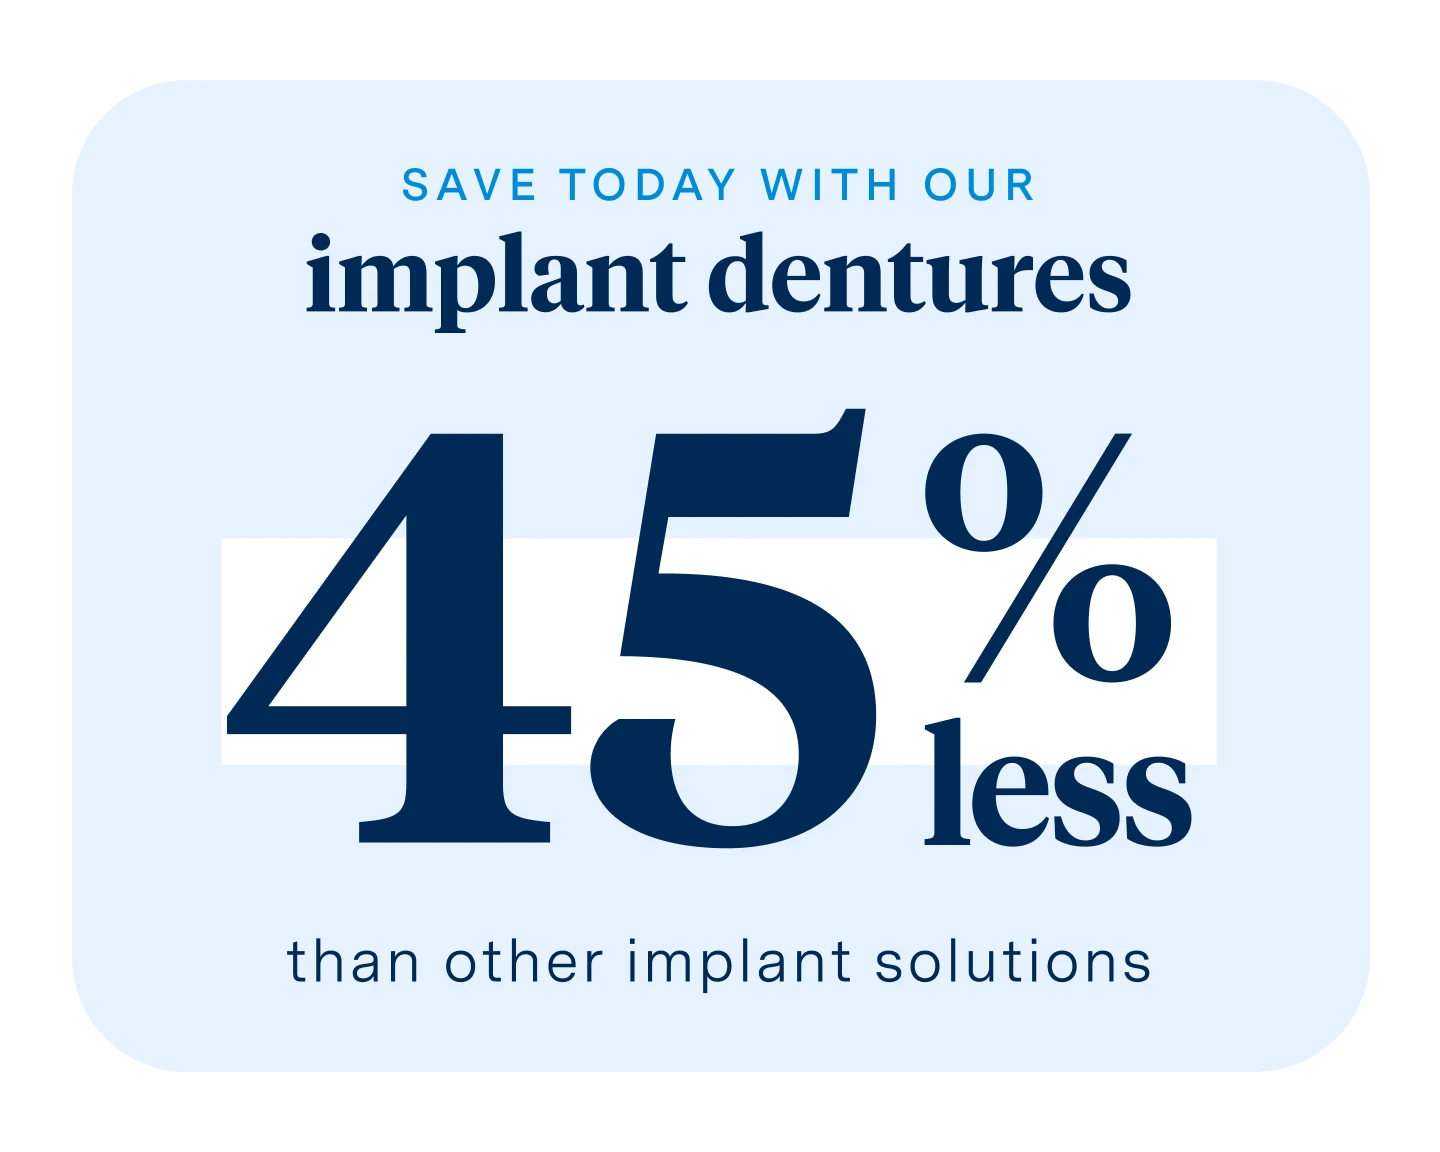 Promotional graphic with text, 'Save today with our implant dentures 45% less than other implant solutions'.